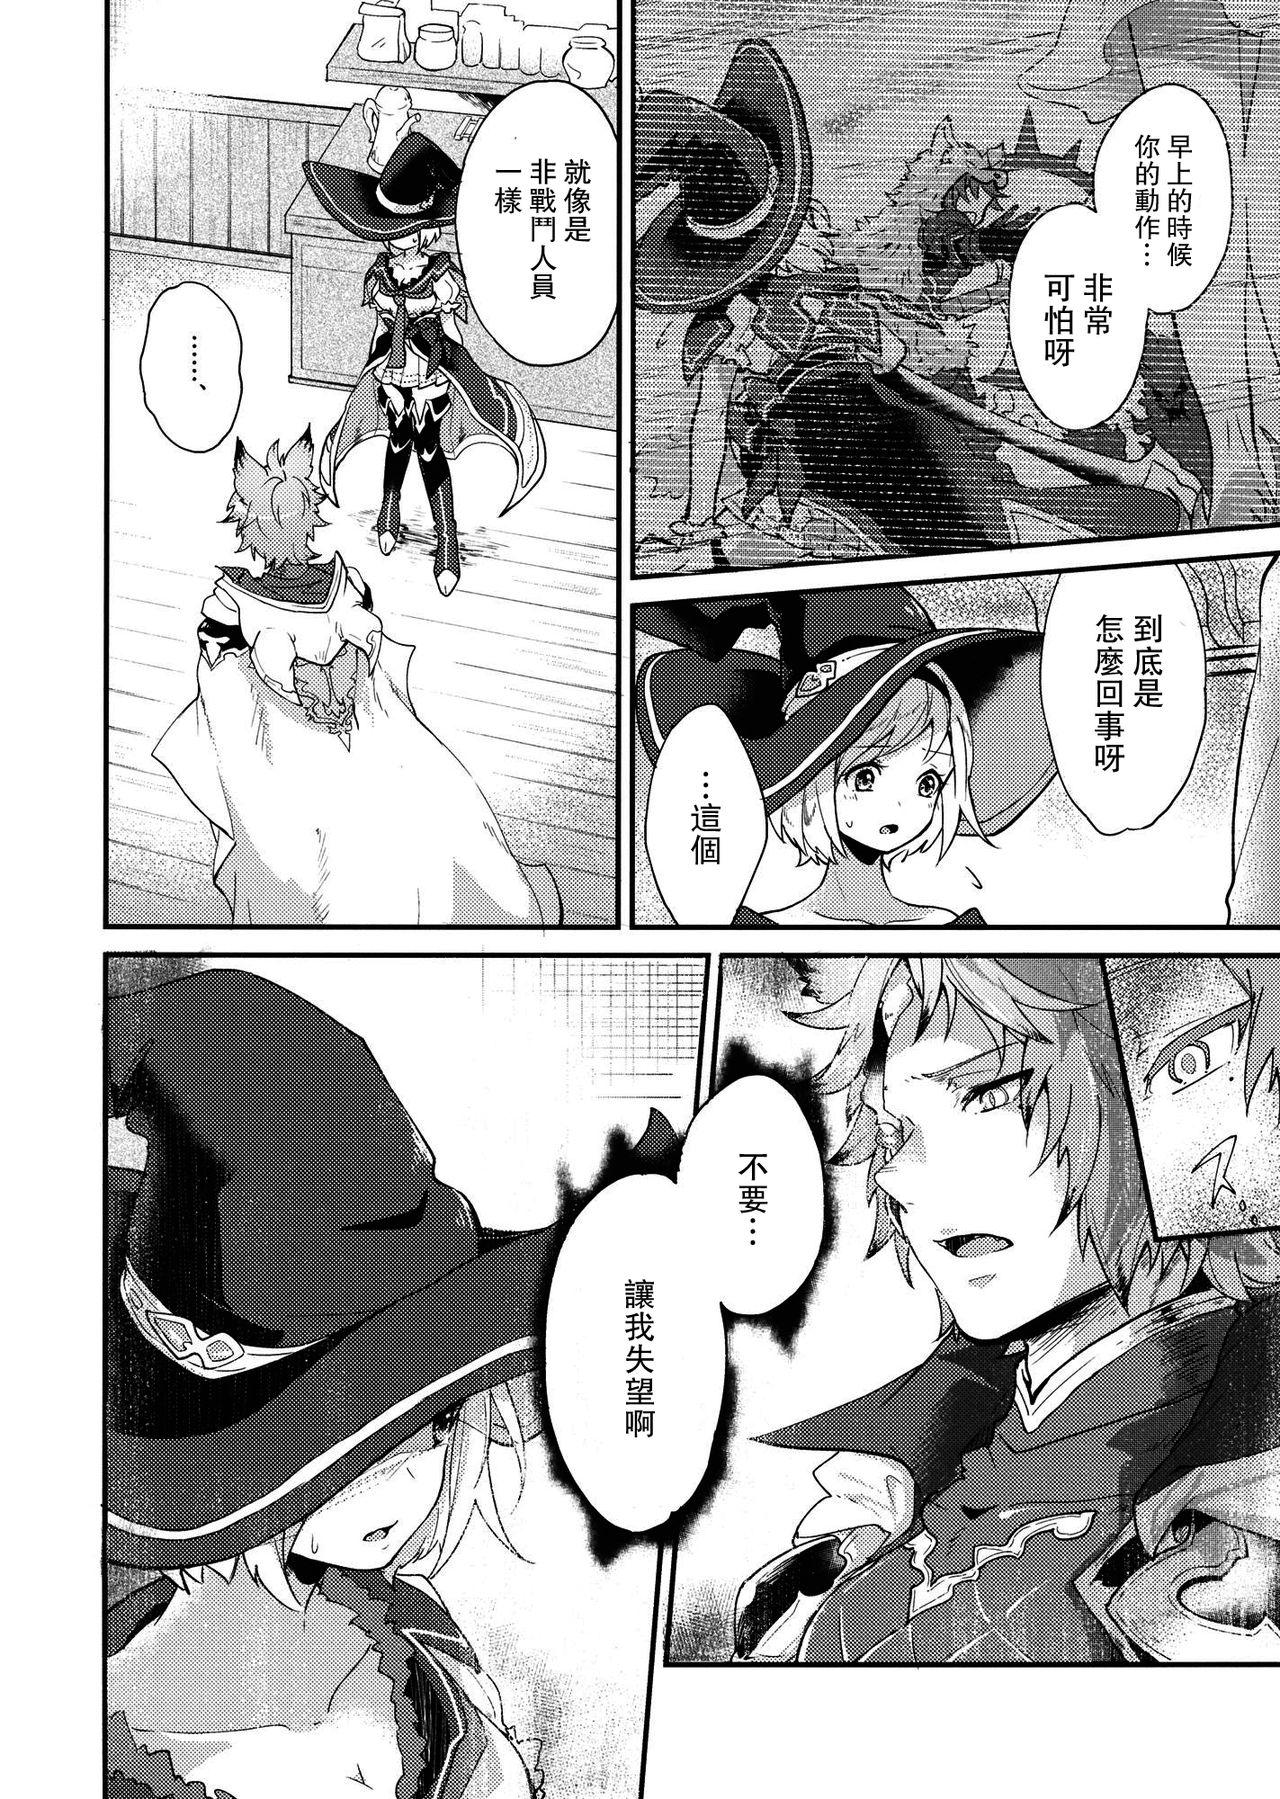 Butt Plug howling you - Granblue fantasy Ride - Page 10